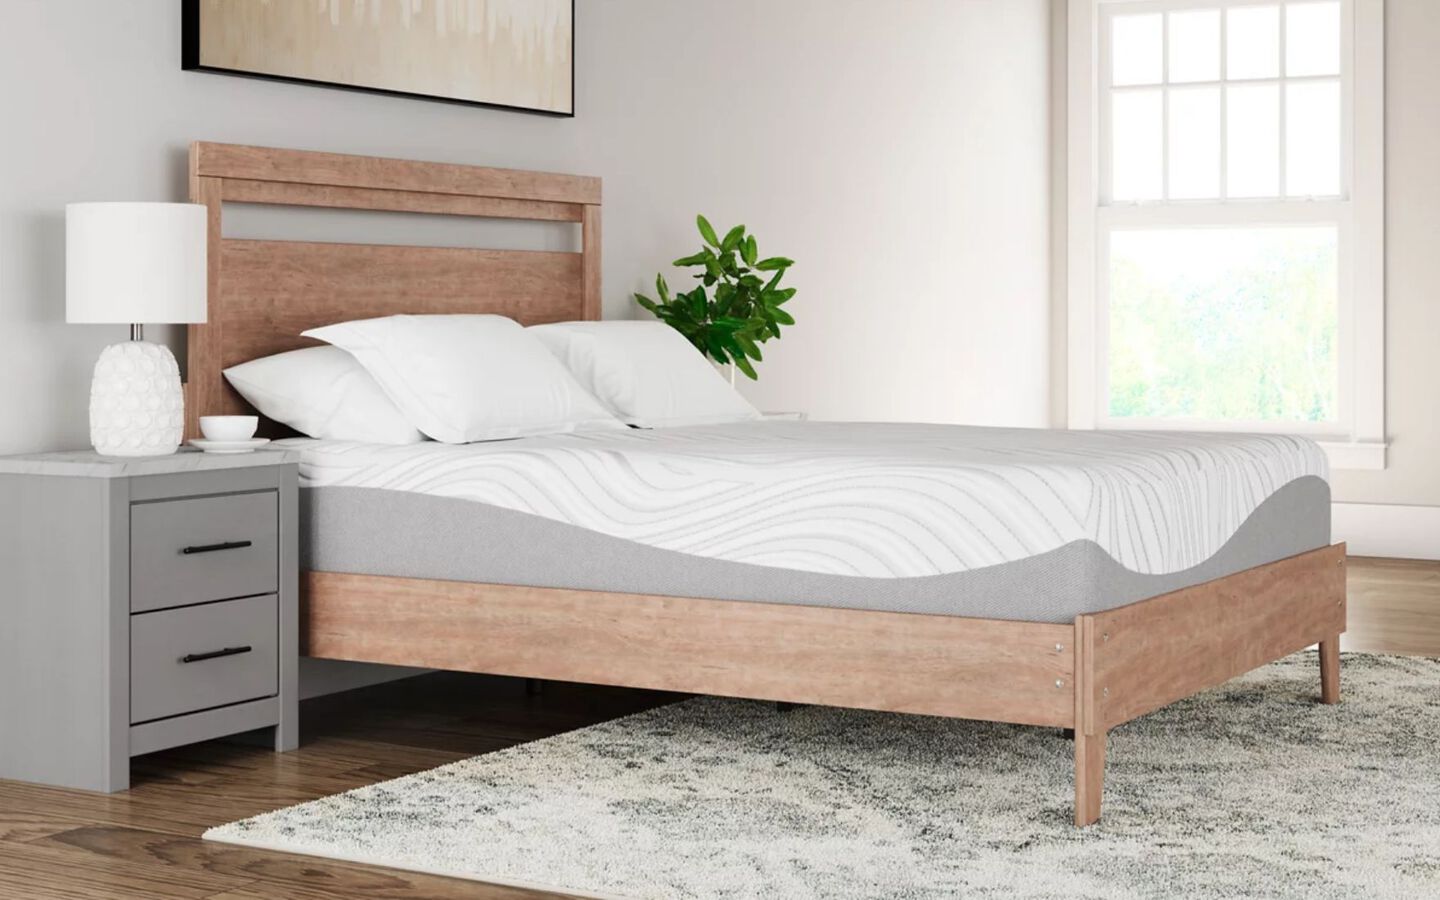 Light grey and white mattress on a wooden bedframe next to a grey nightstand